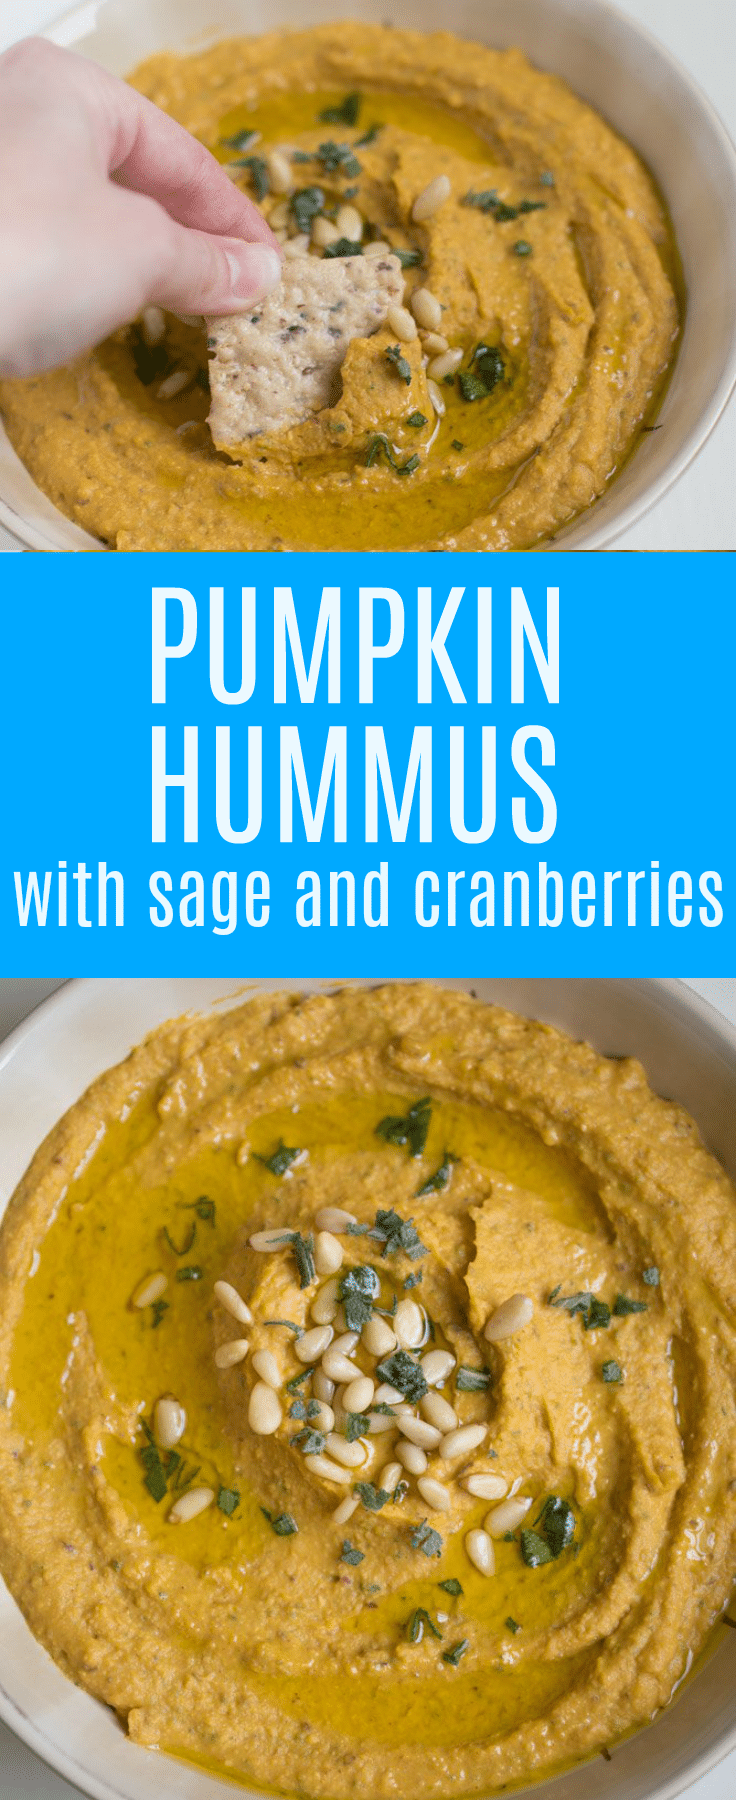 Pumpkin Hummus with Sage and Cranberries is a delicious appetizer that's full of bold flavors and perfect for fall parties!